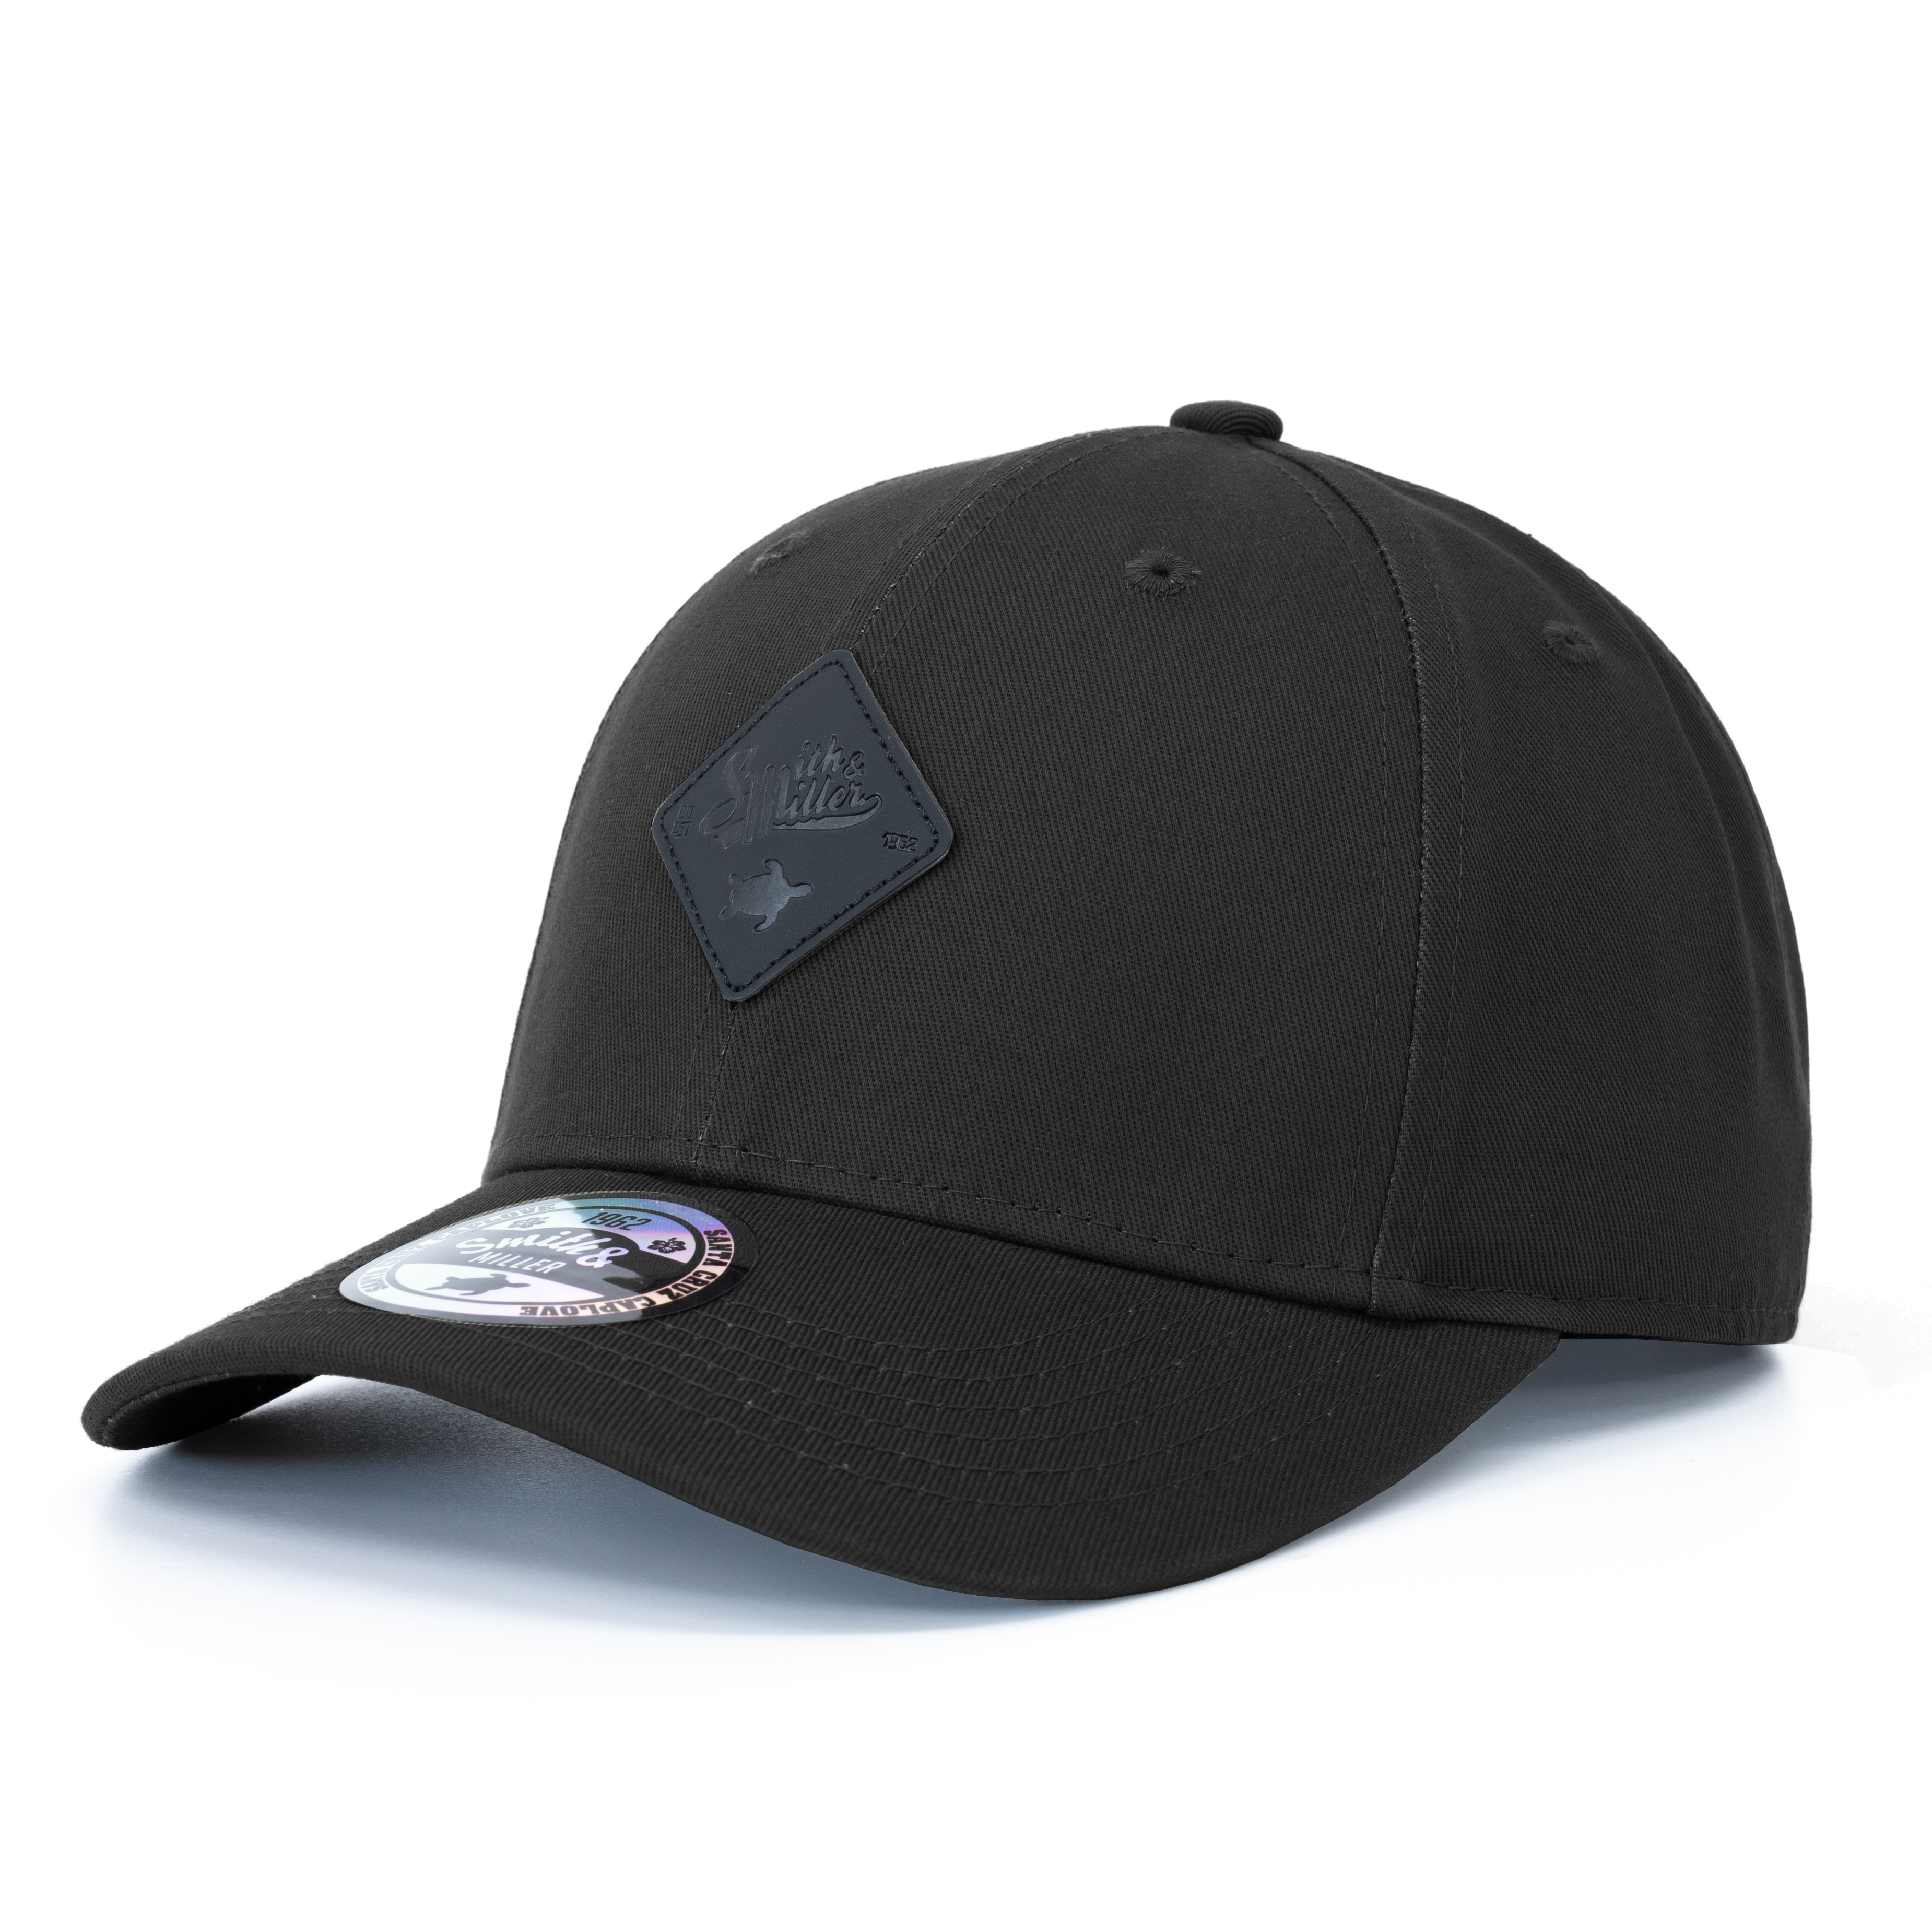 Smith & Miller Beverly Curved Cap, black